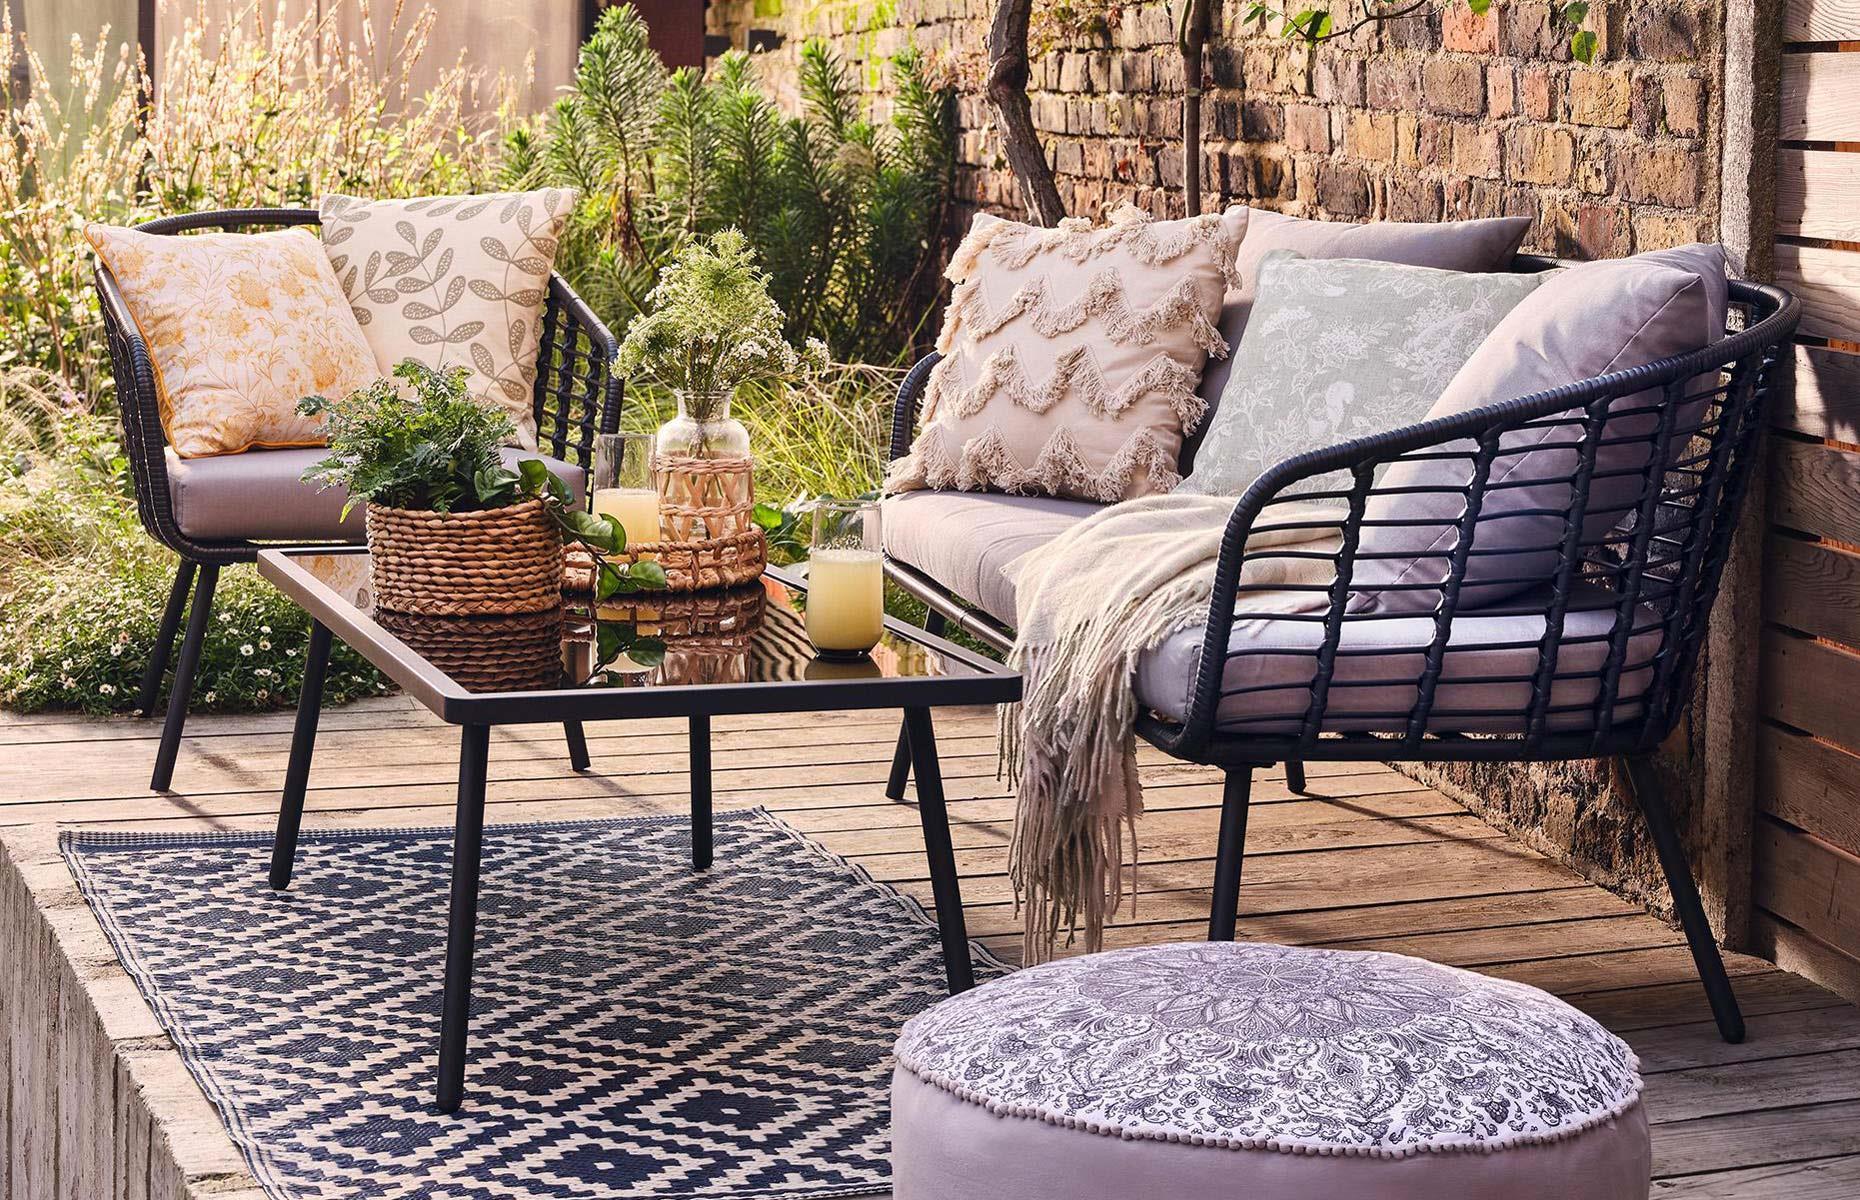 The Best Outdoor Furniture For Small Spaces, 43% OFF